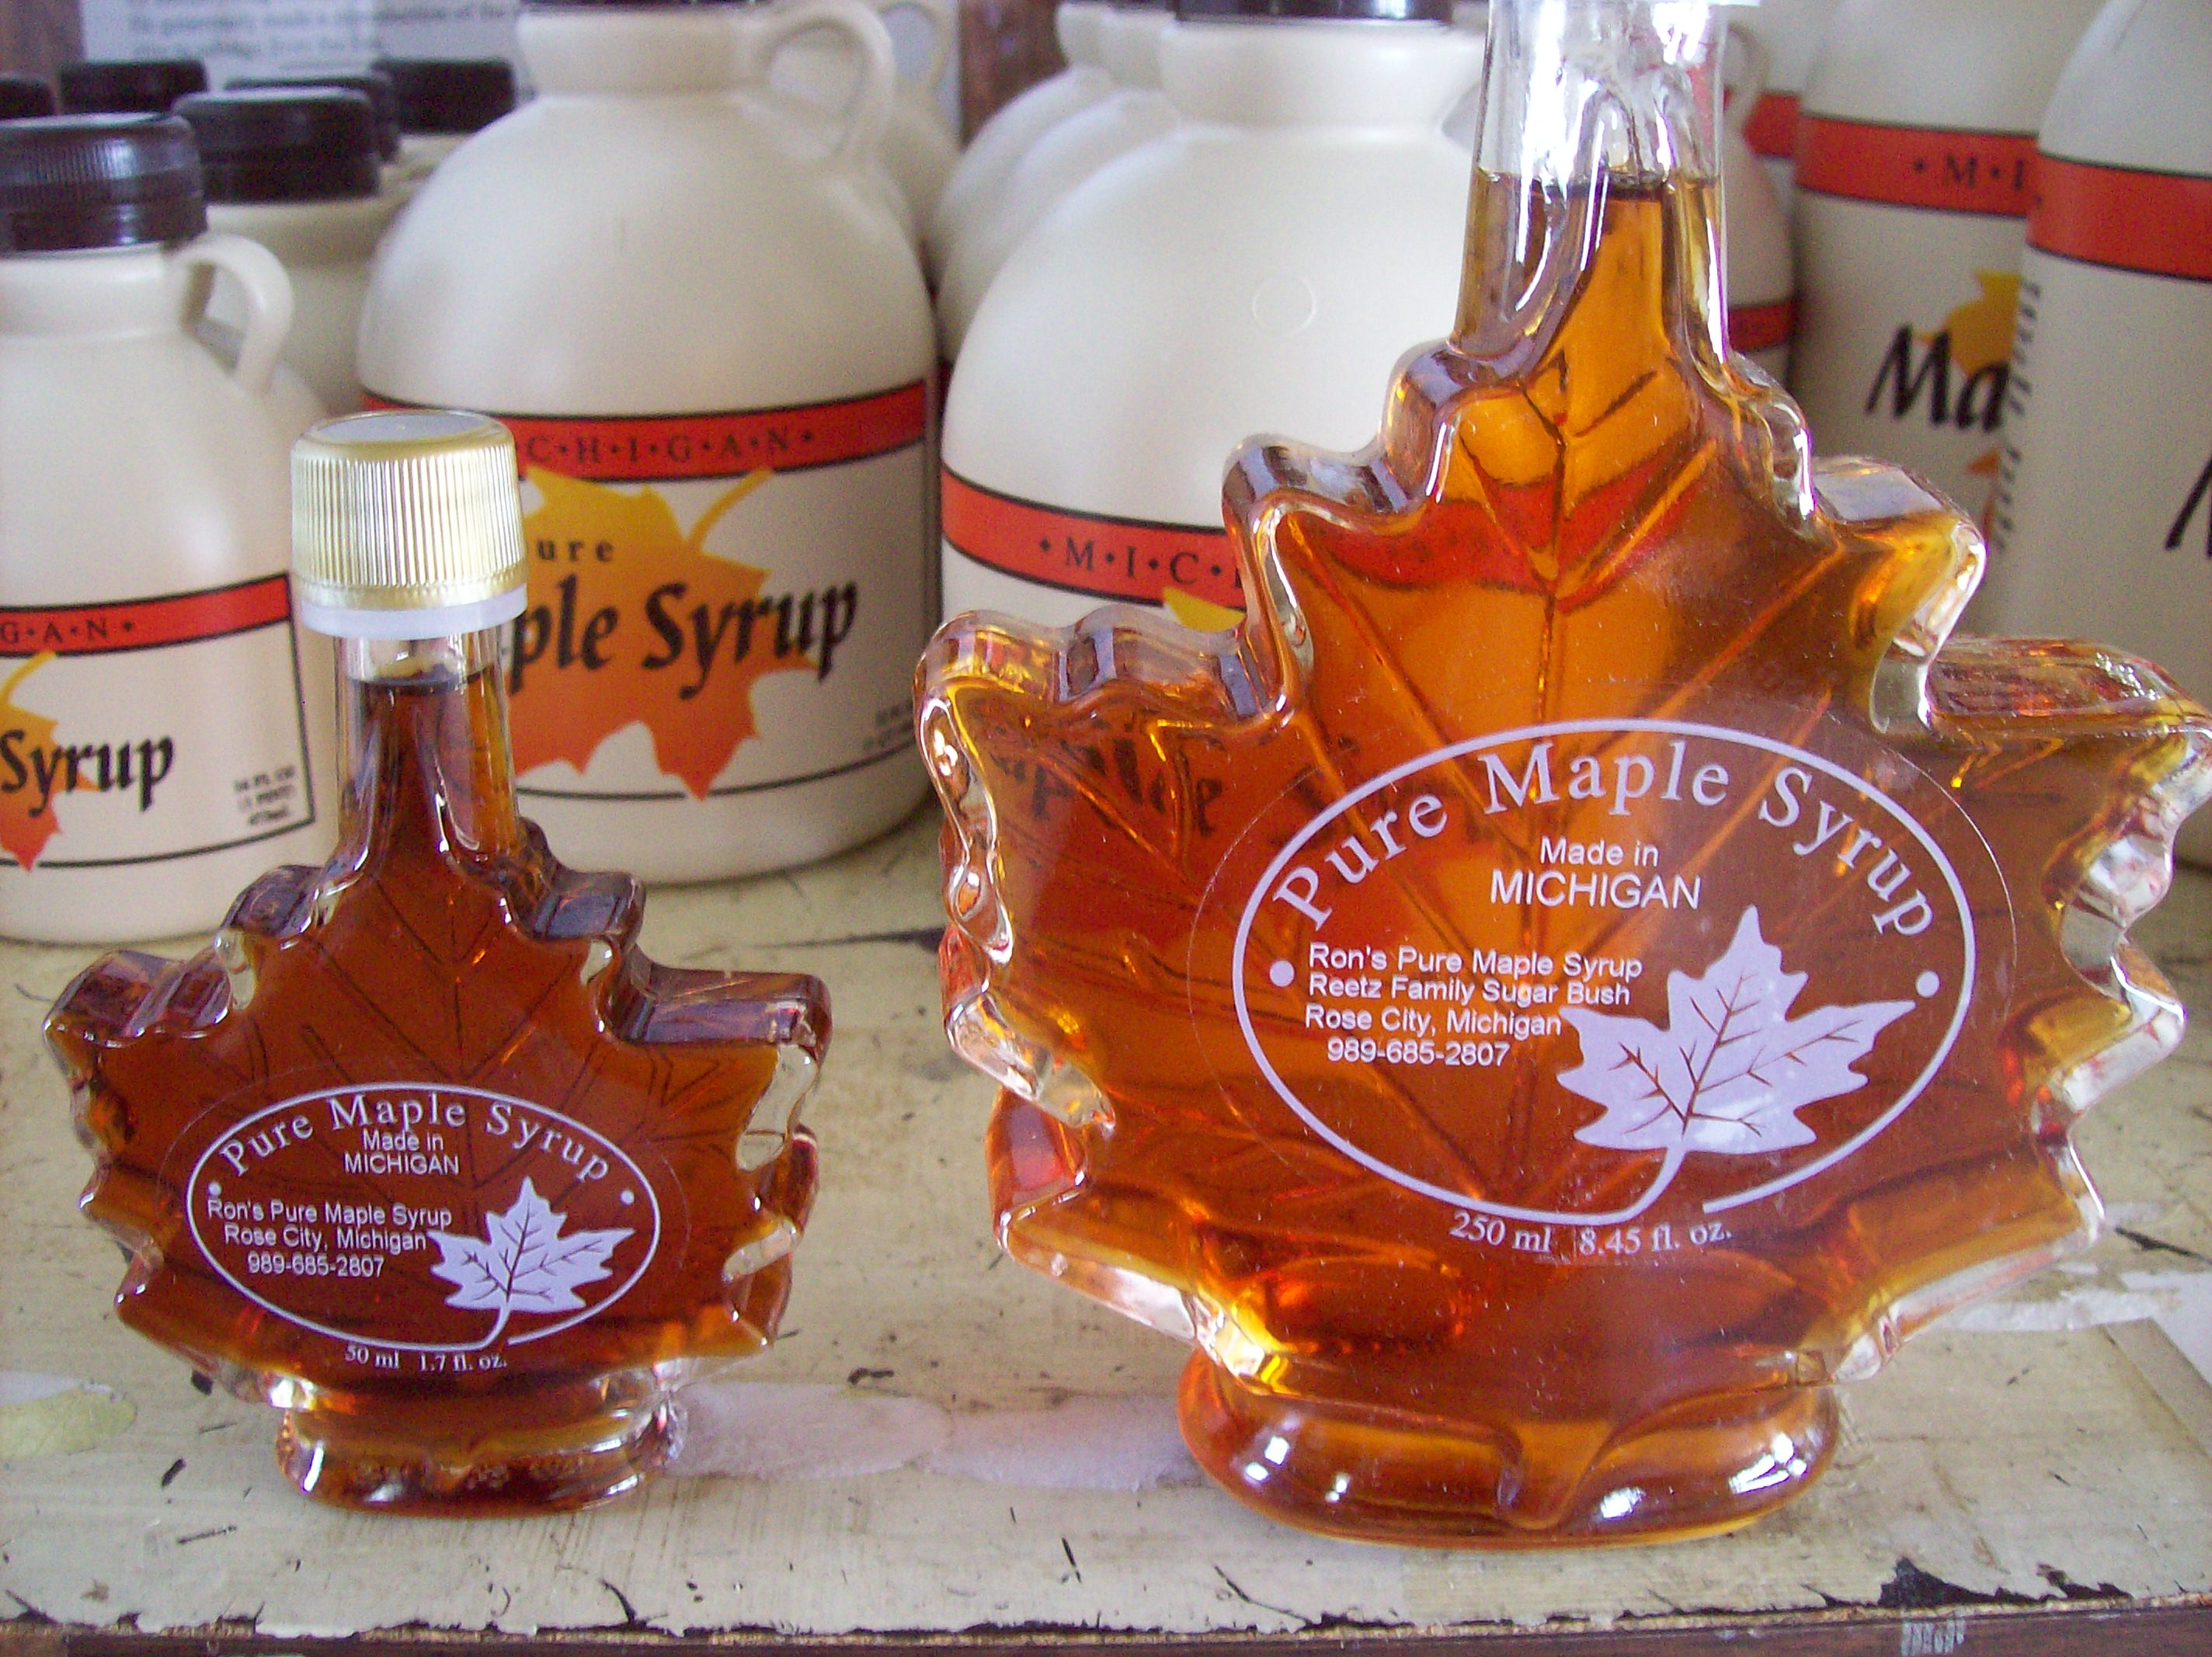 Ron's Pure Maple Syrup